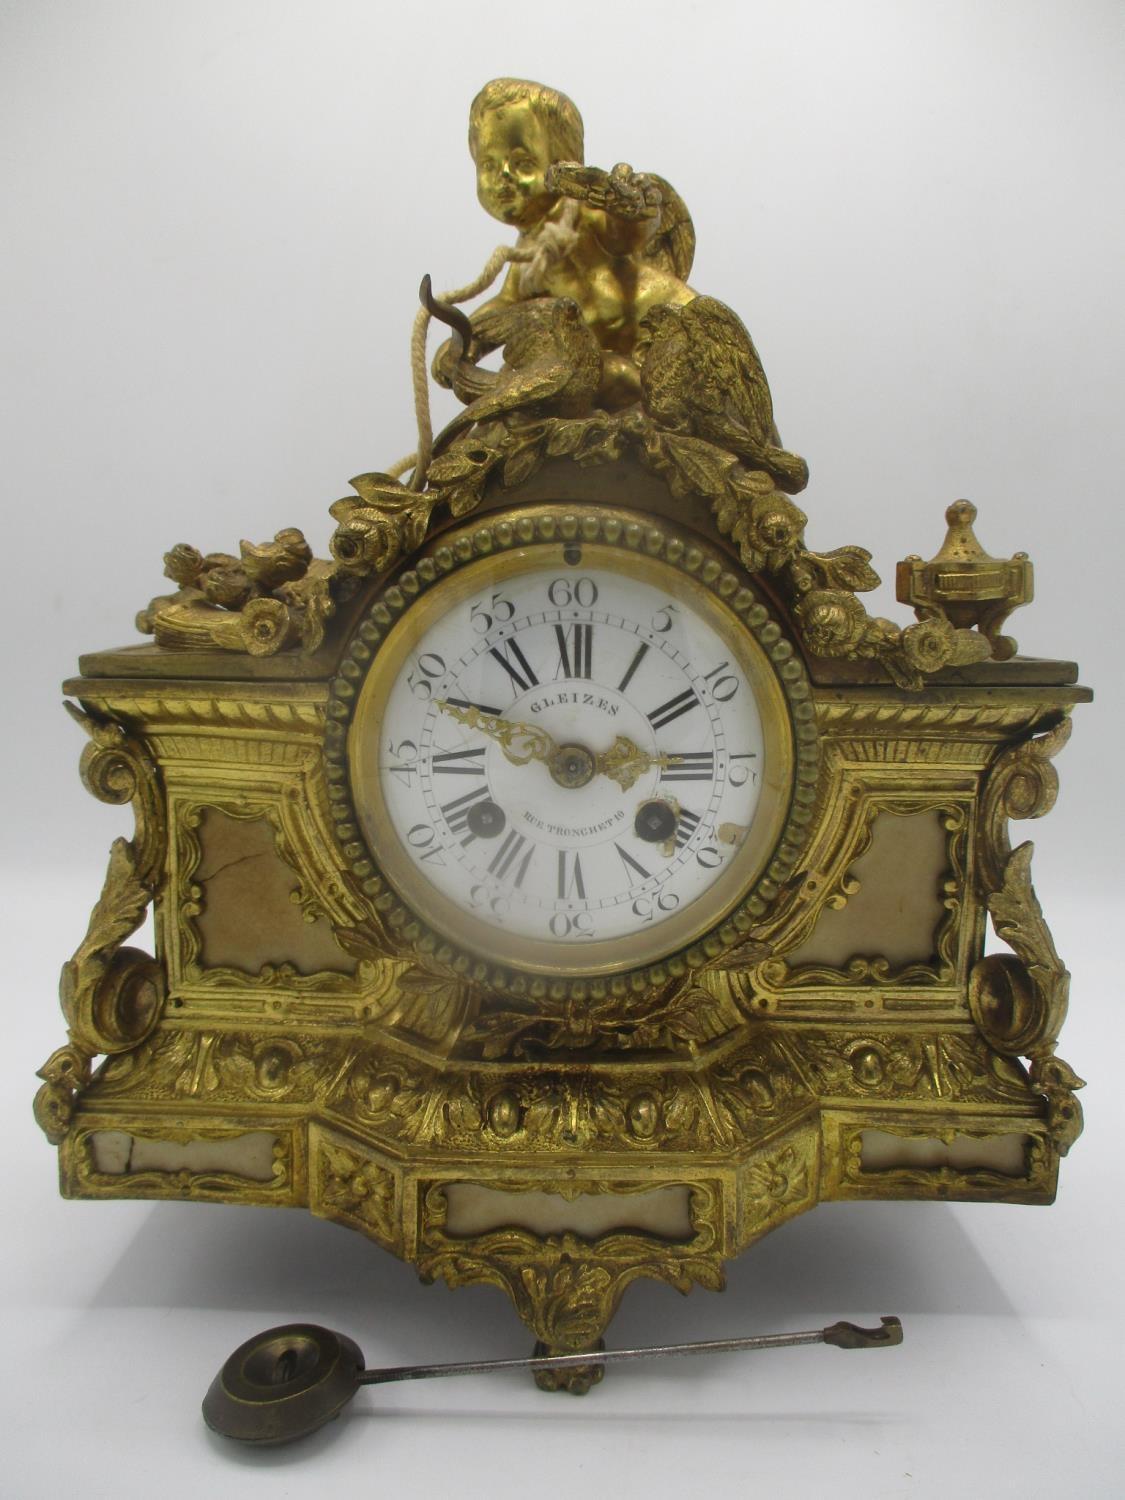 A mid/late 19th century French gilt metal mantle clock decorated with a cherub to the top with two